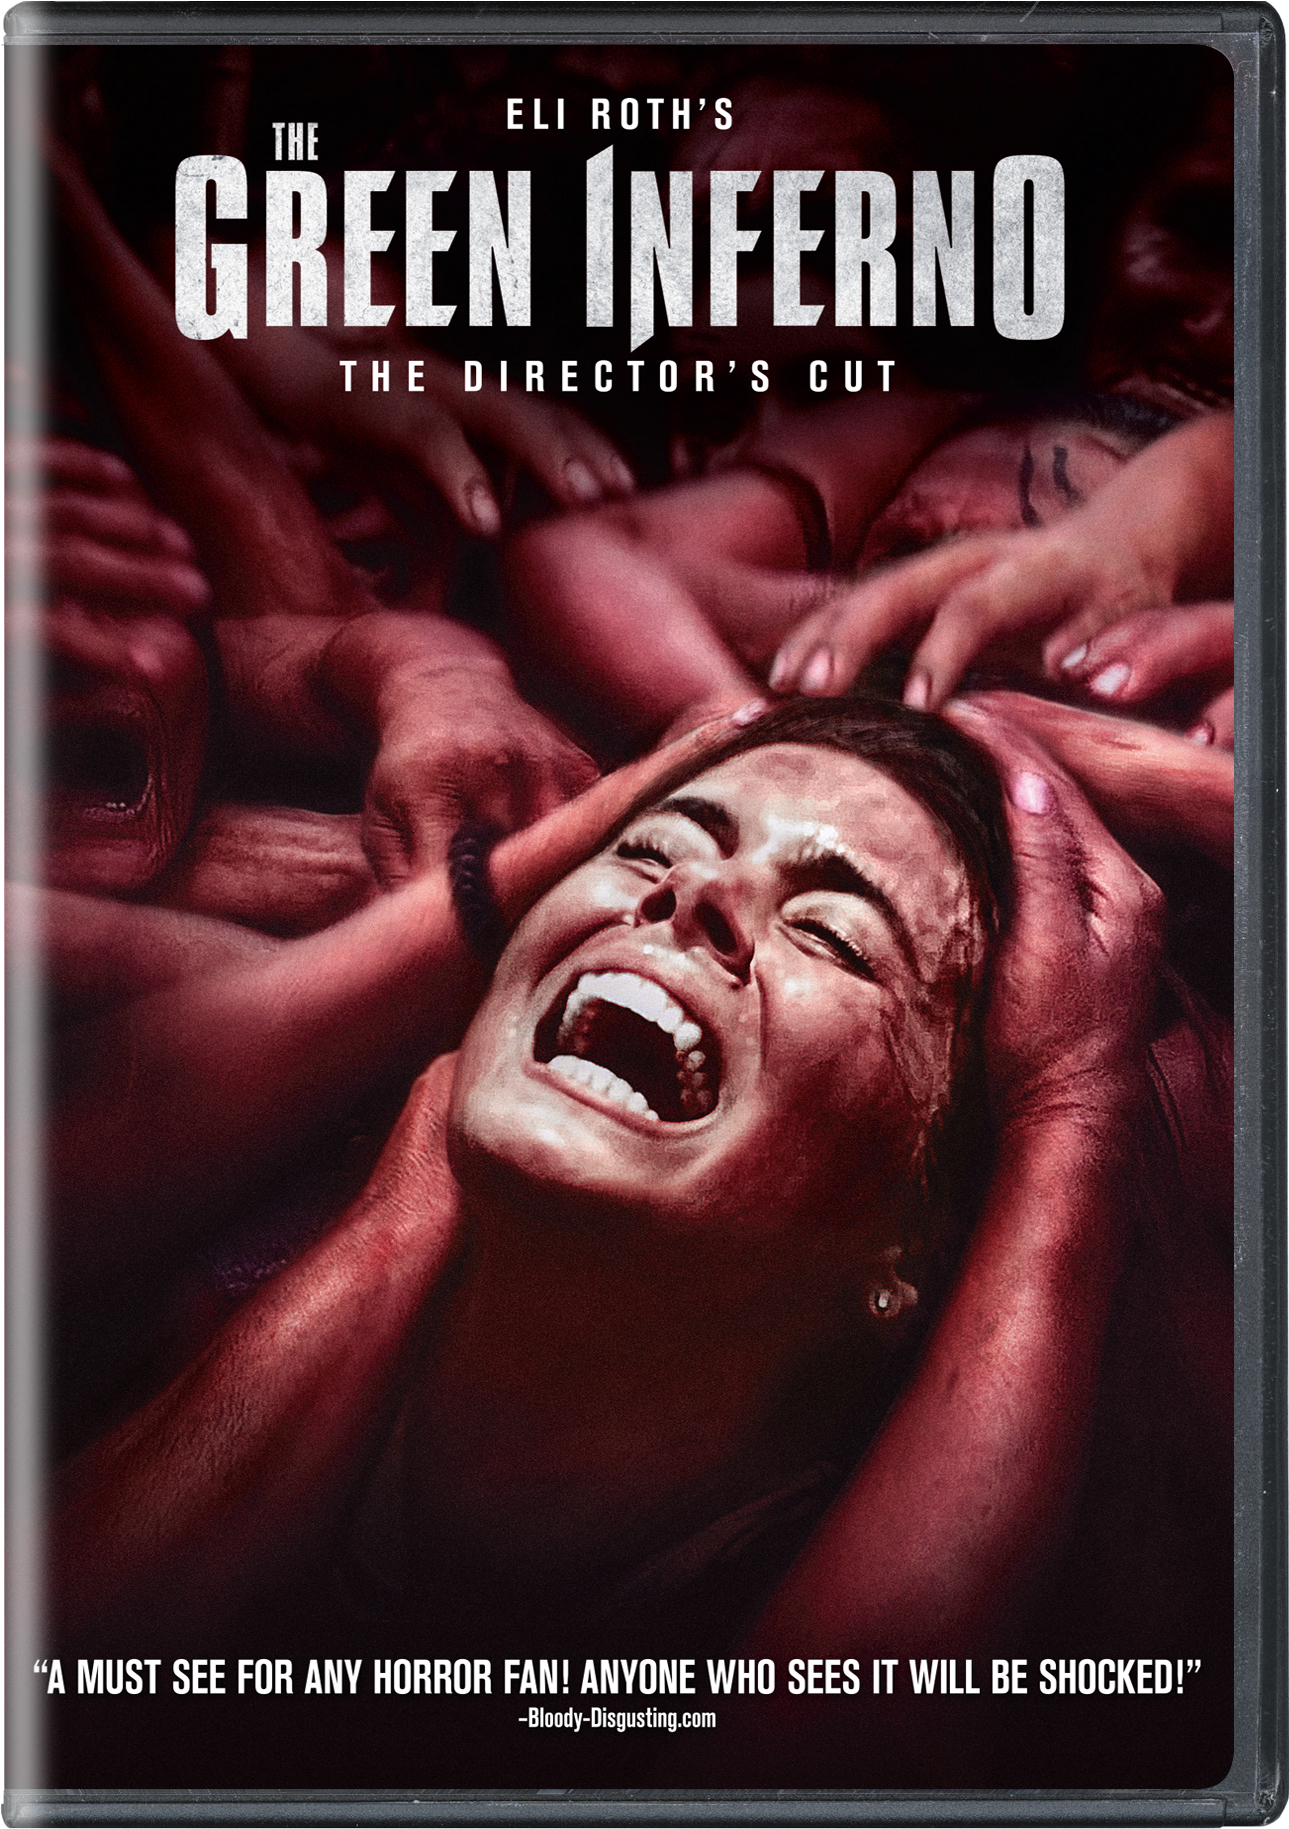 The Green Inferno - DVD [ 2015 ]  - Horror Movies On DVD - Movies On GRUV